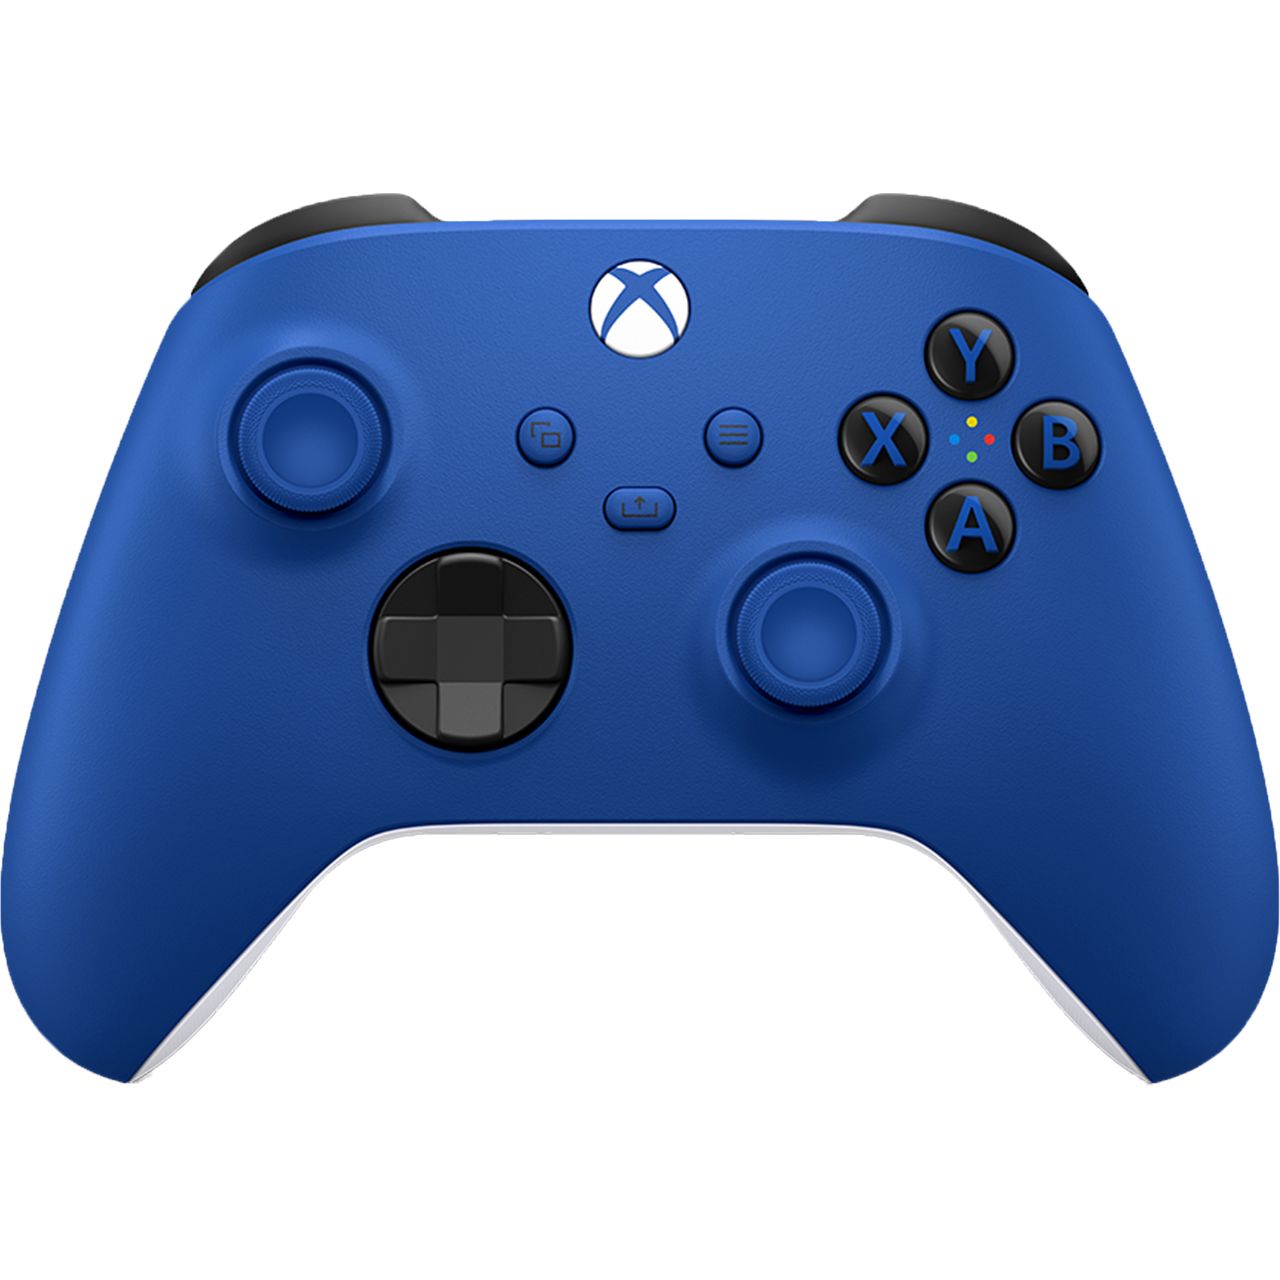 Xbox Wireless Controller Review